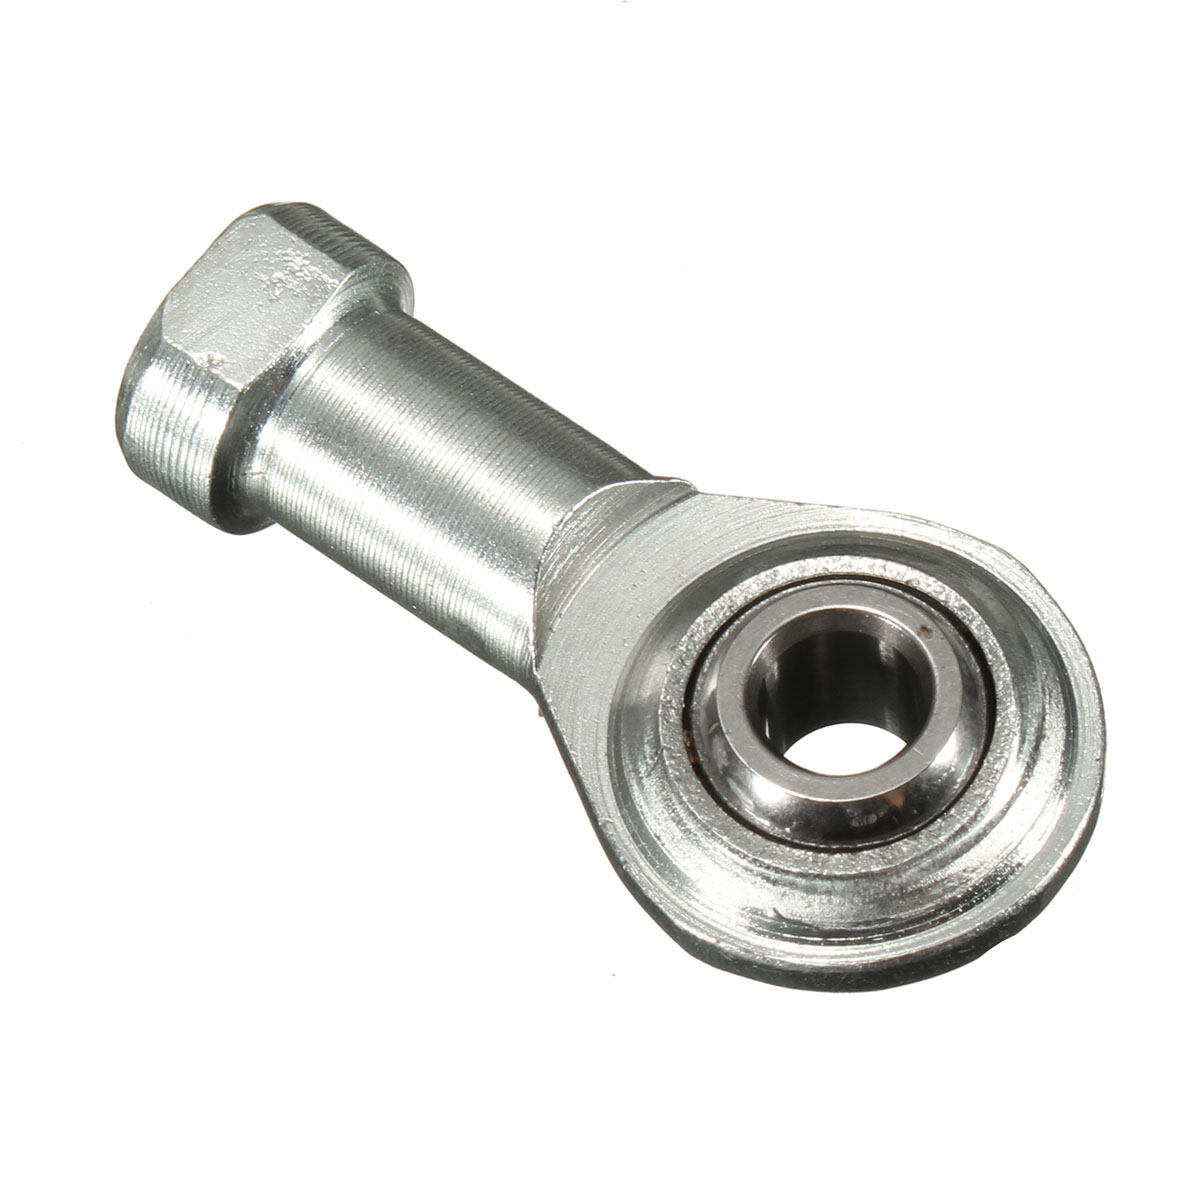 4pcs-M6-x-1mm-Right-Hand-Thread-Rod-End-Joint-Bearing-6mm-Female-Thread-Joint-Ball-Bearing-1586681-4